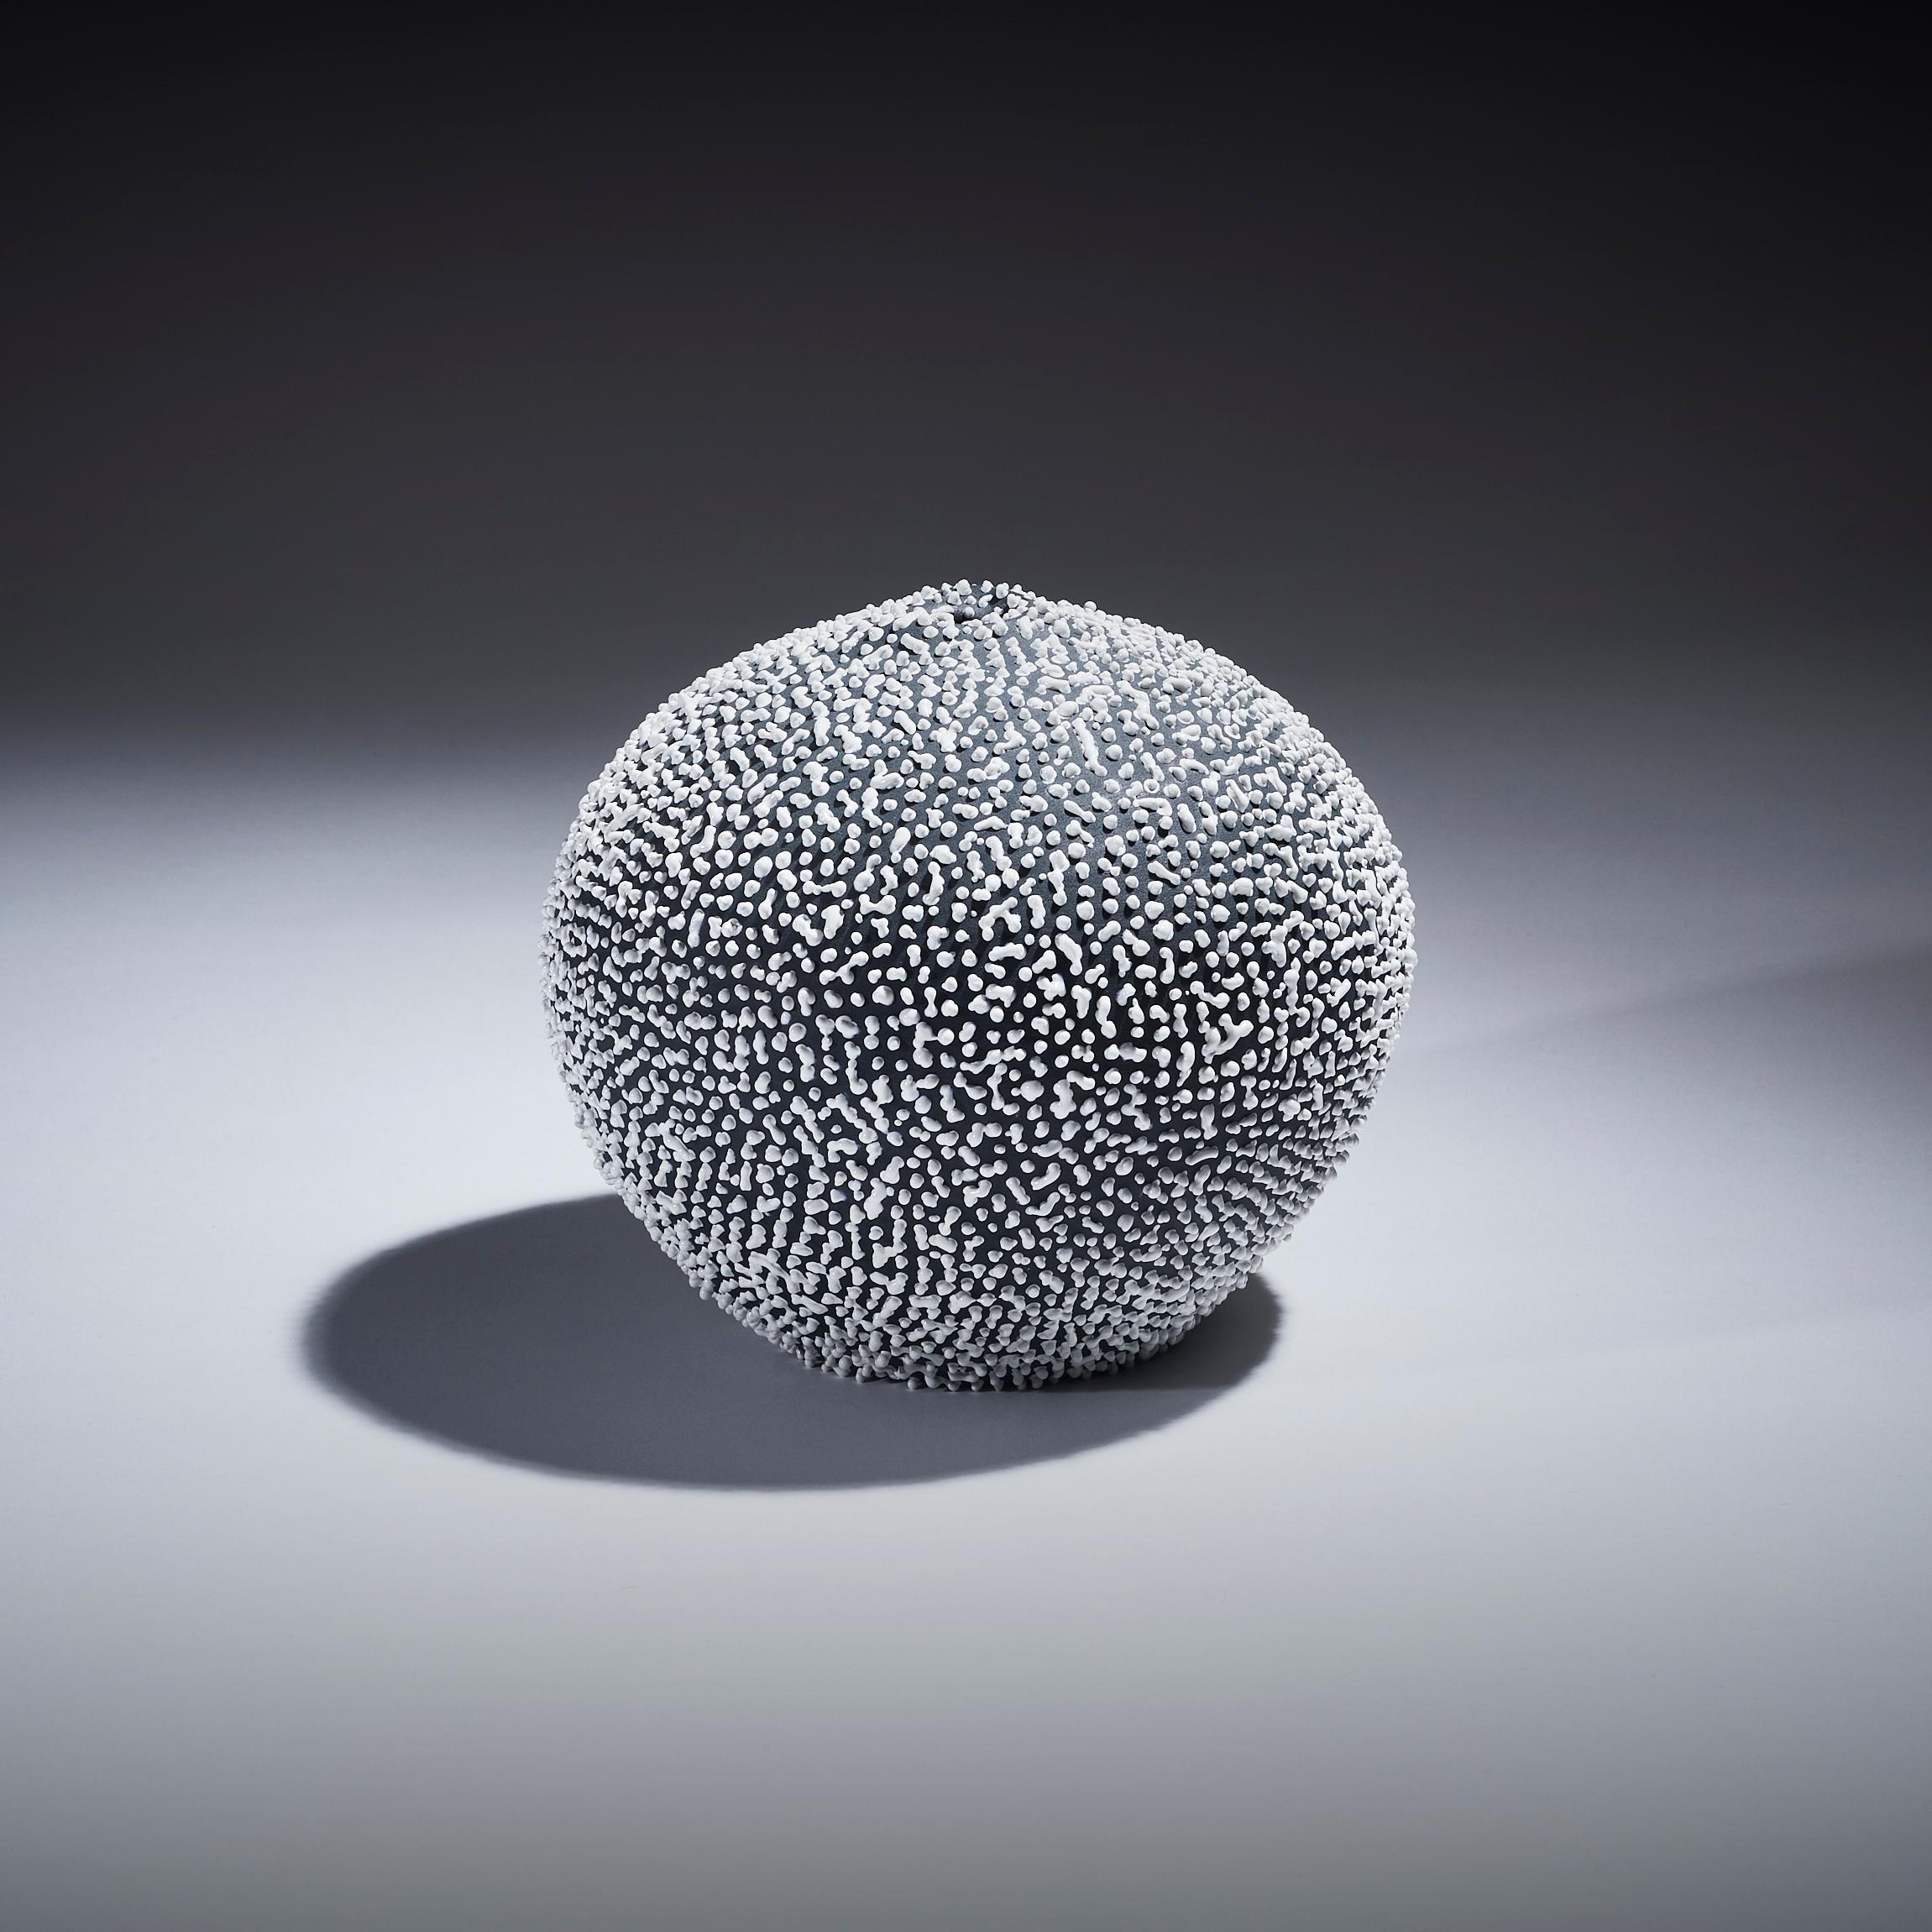 Points Vessel II, 2018, (Ceramic, C. 6.6 in. h x 7.6 in. d, Object No.: 3621)

Lone Skov Madsen was born in 1964 and lives and works in Frederiksberg, Denmark. She received degrees from the Danish Design School in Copenhagen in 1988 and the Istituto